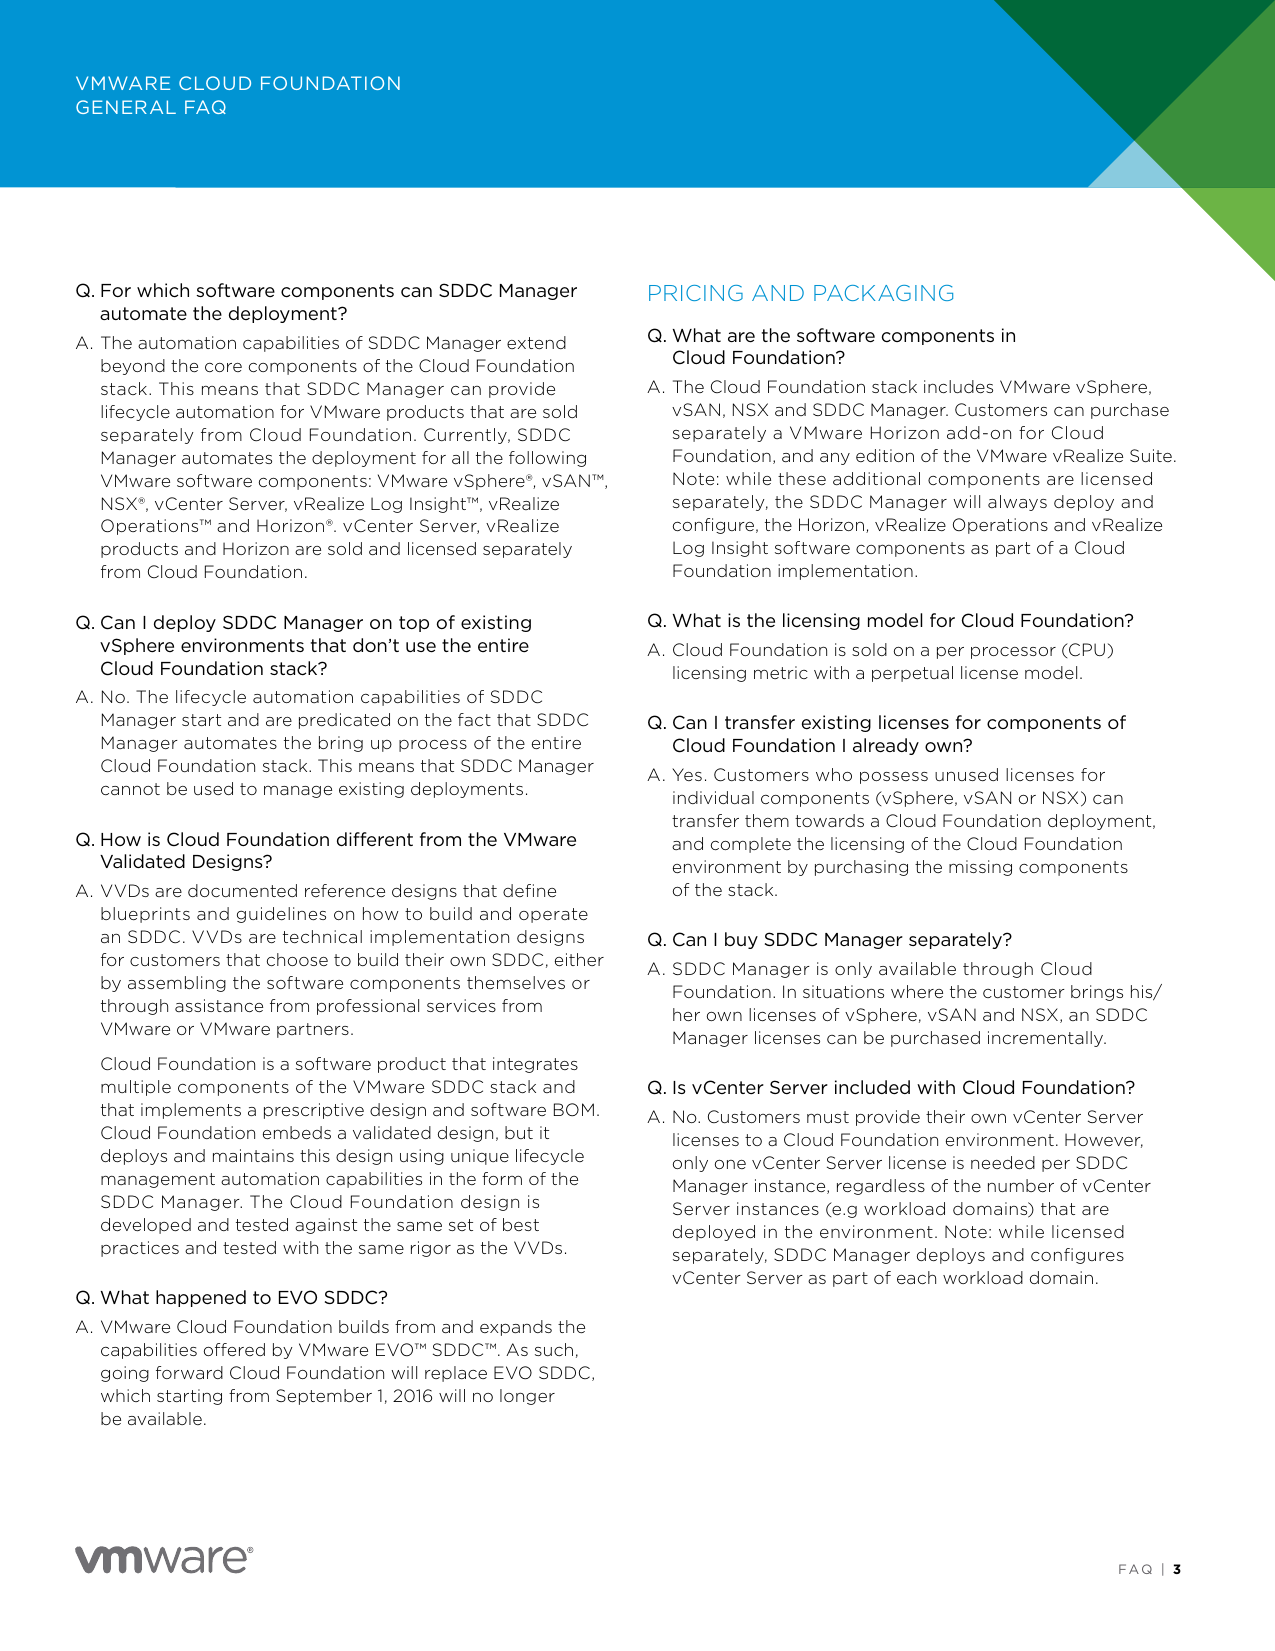 Page 3 of 7 - VMware Cloud Foundation General FAQ Vmware-cloud-foundation-faq